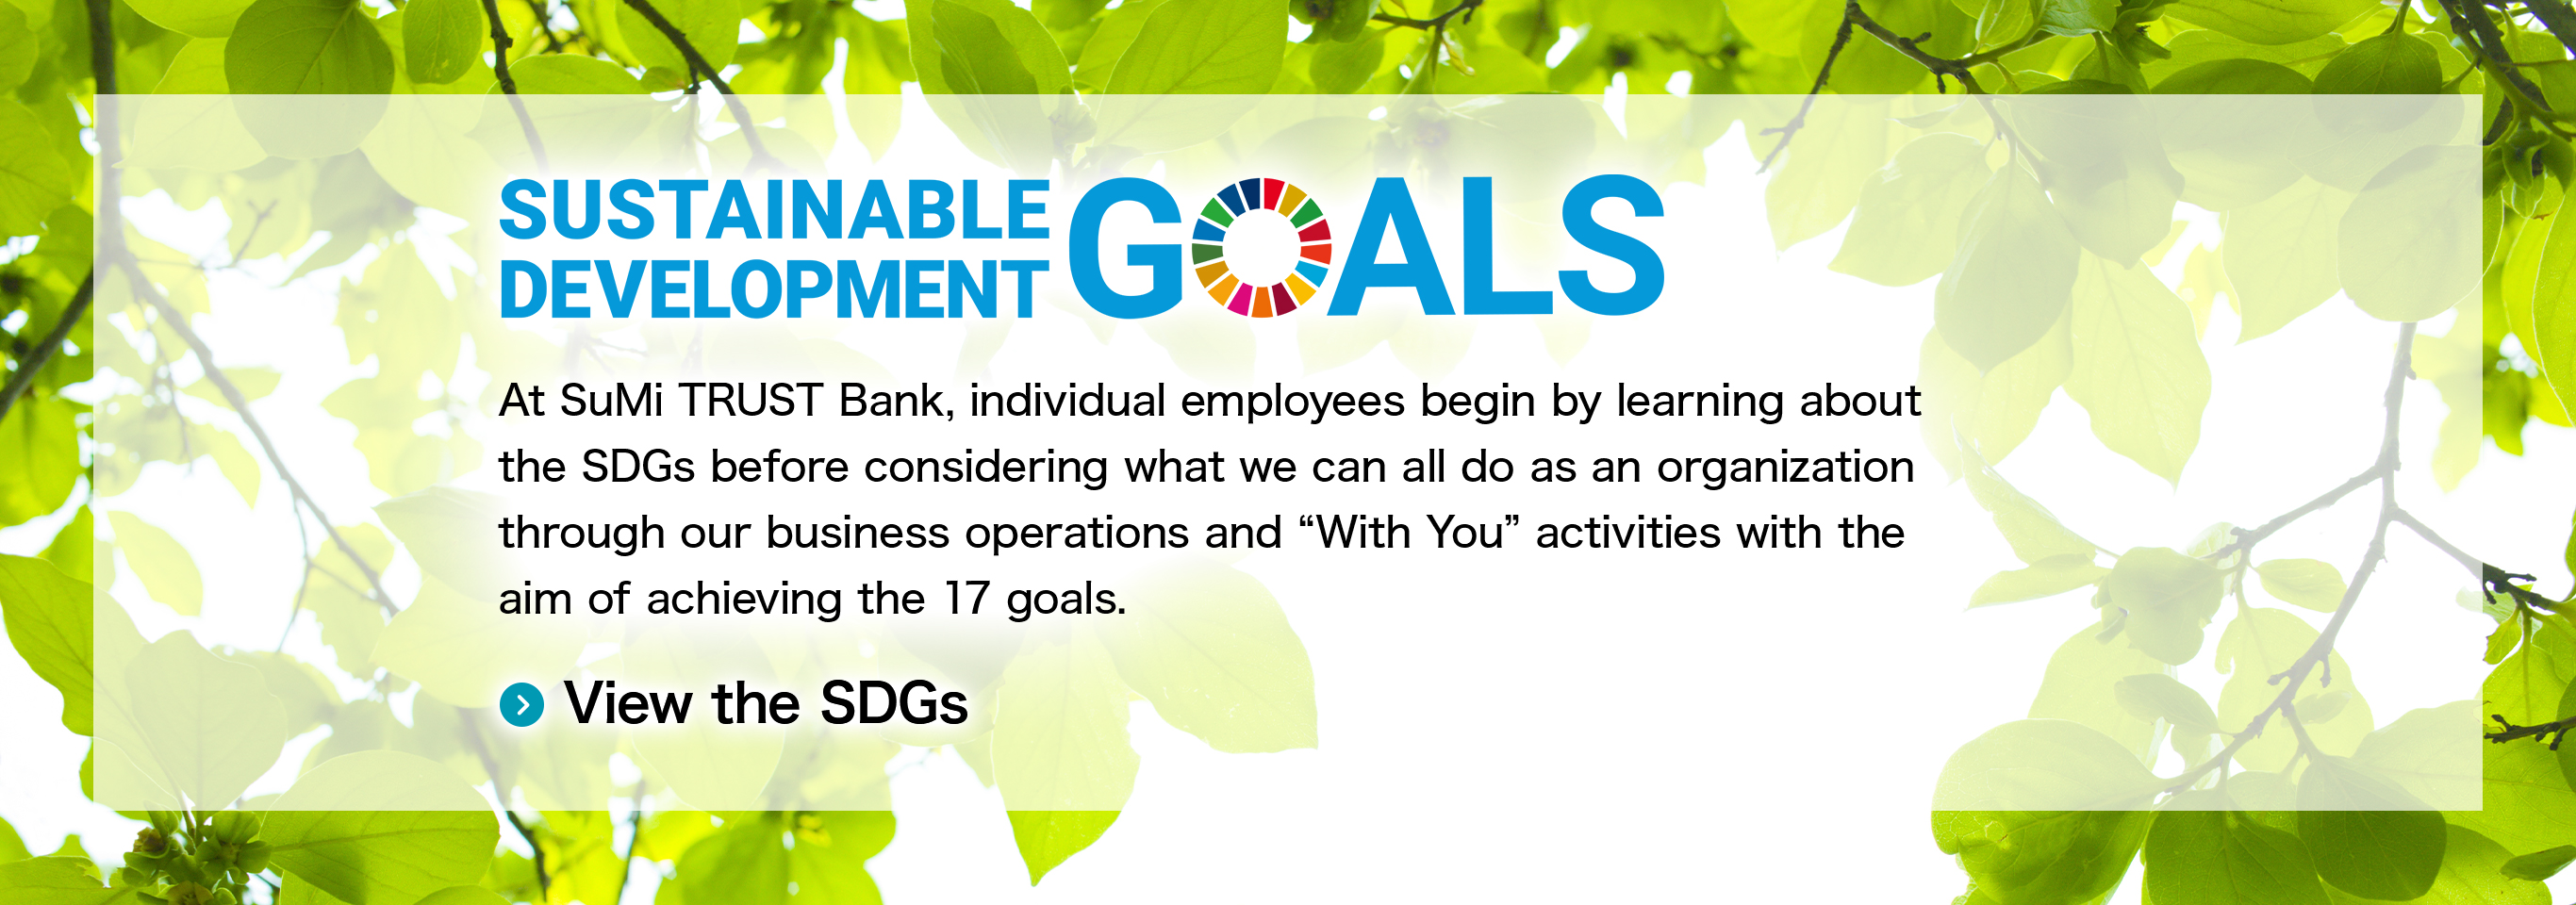 SUSTAINABLE DEVELOPMENT GOALS At SuMi TRUST Bank, individual employees begin by learning about the SDGs before considering what we can all do as an organization through our business operations and “With You” activities with the aim of achieving the 17 goals. View the SDGs